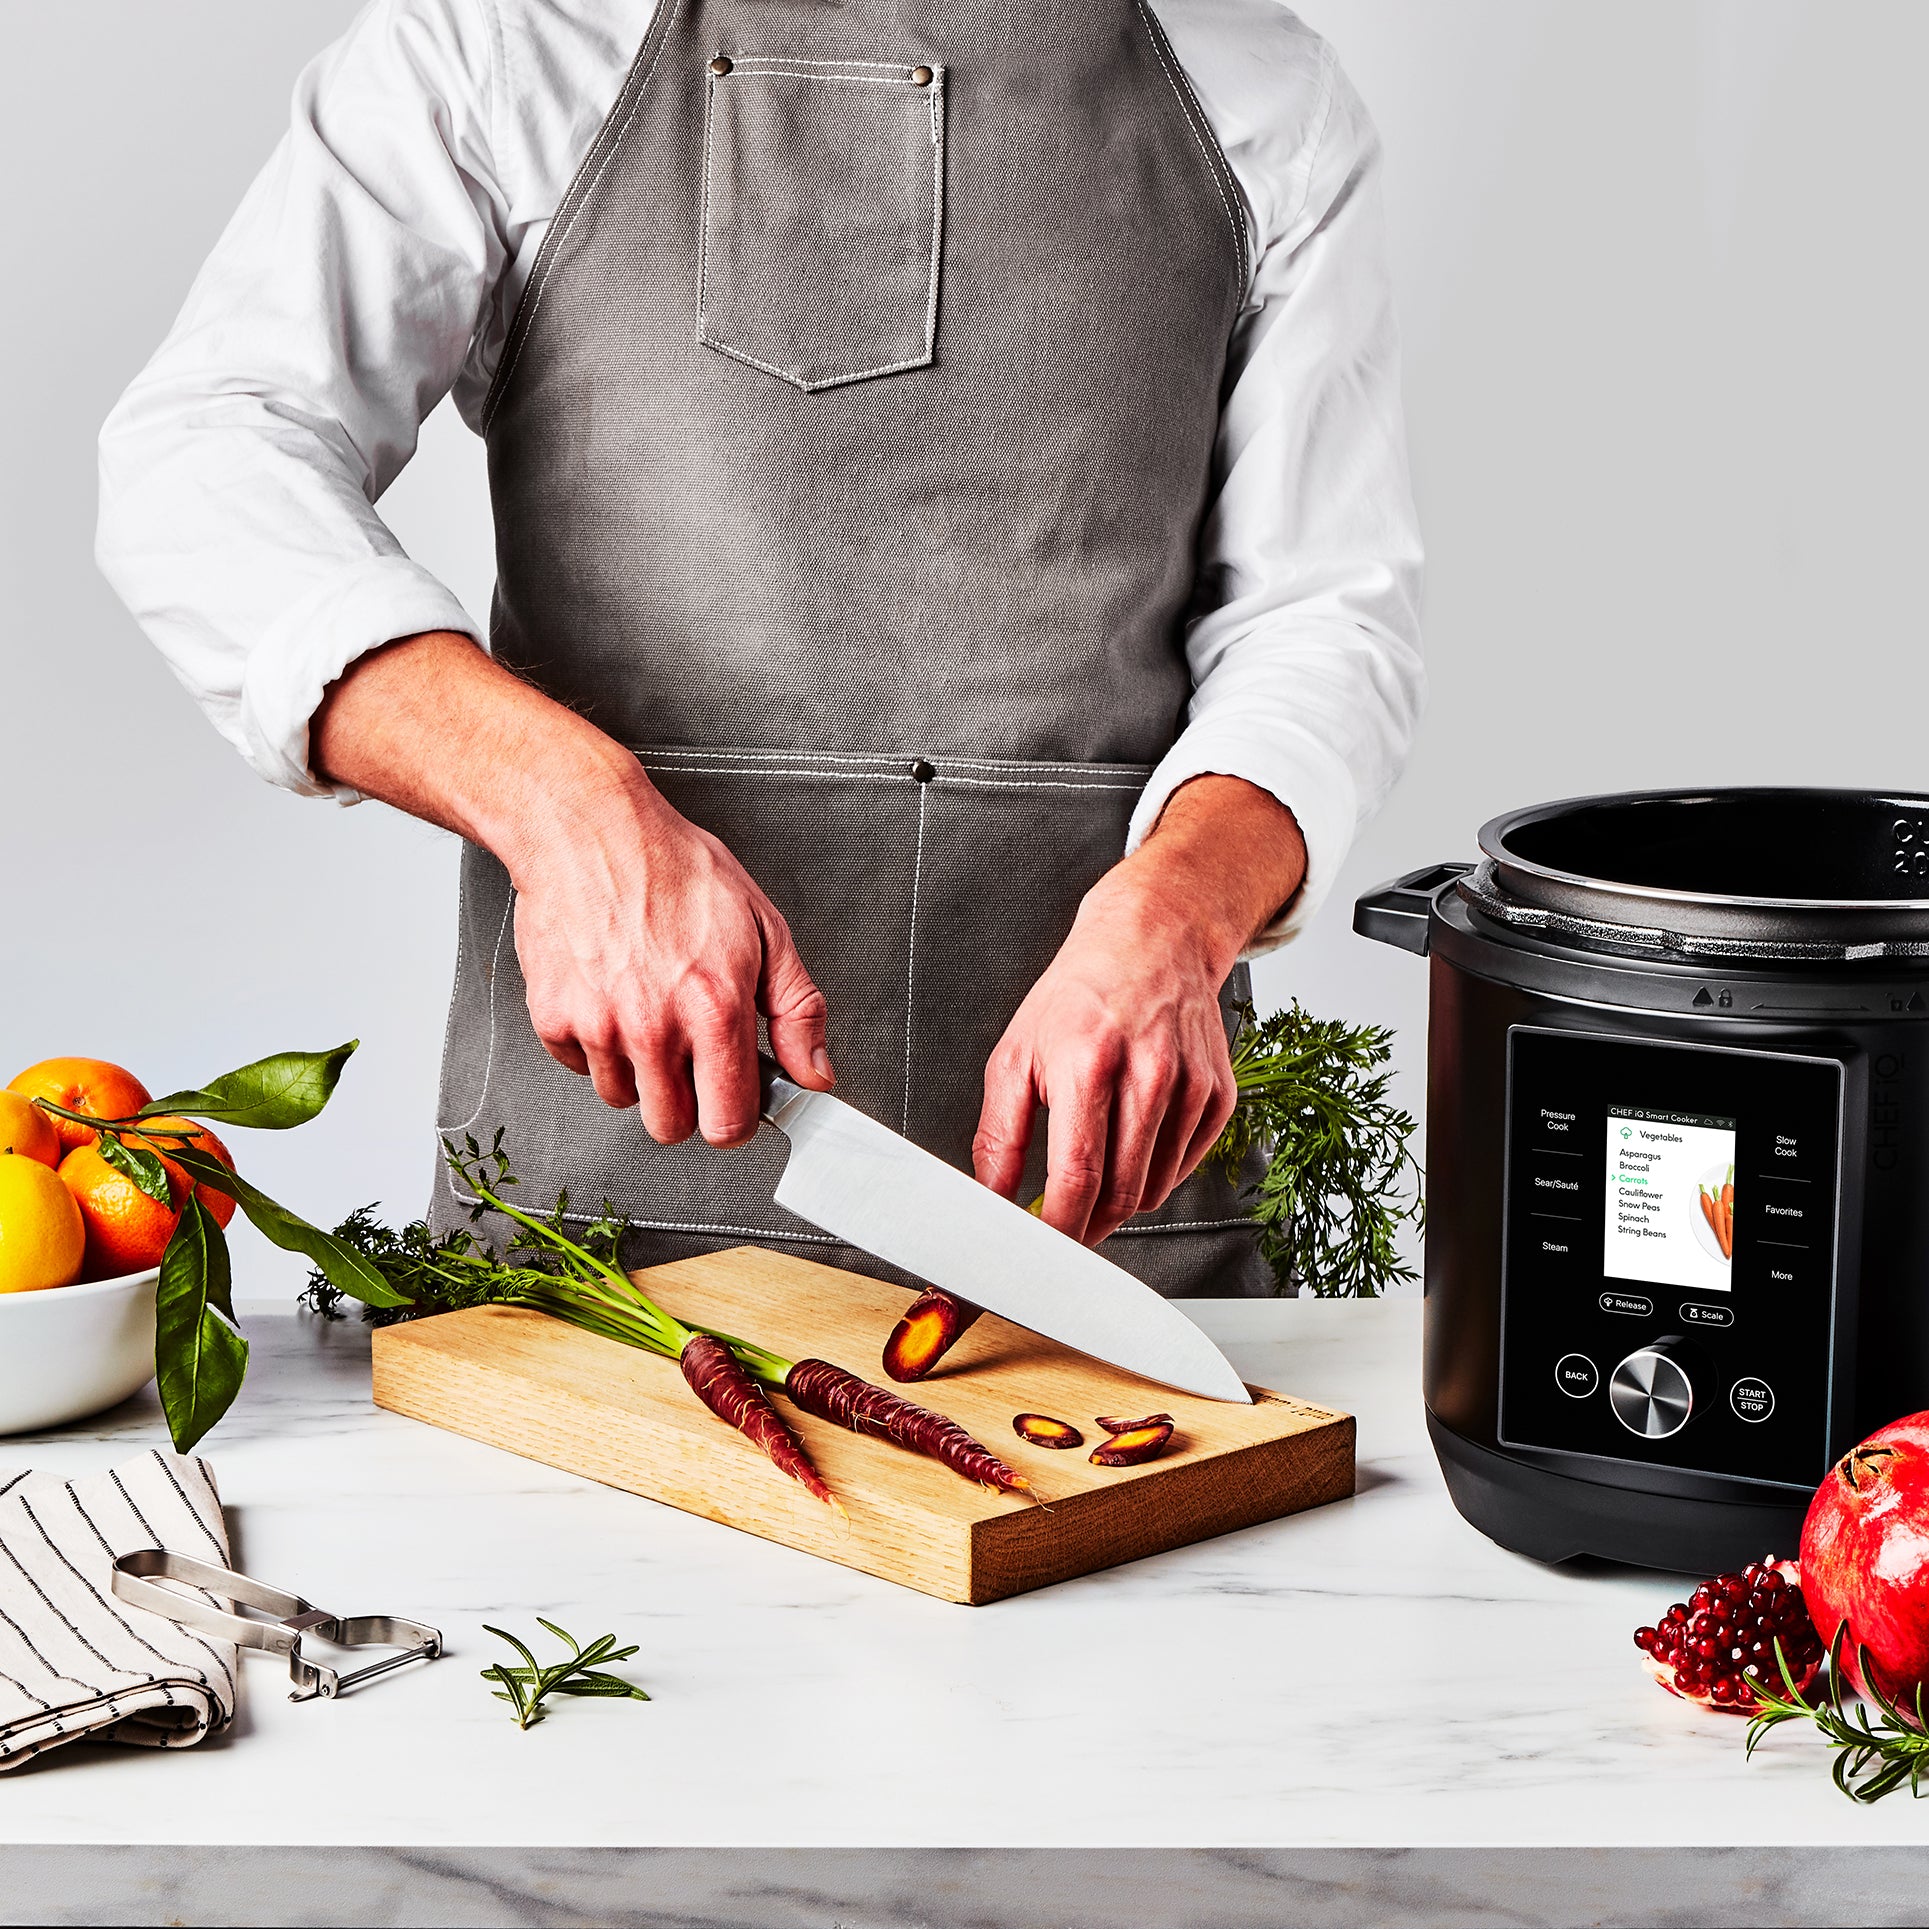 CHEF iQ Review: Is This Smart Pressure Cooker Worth It?